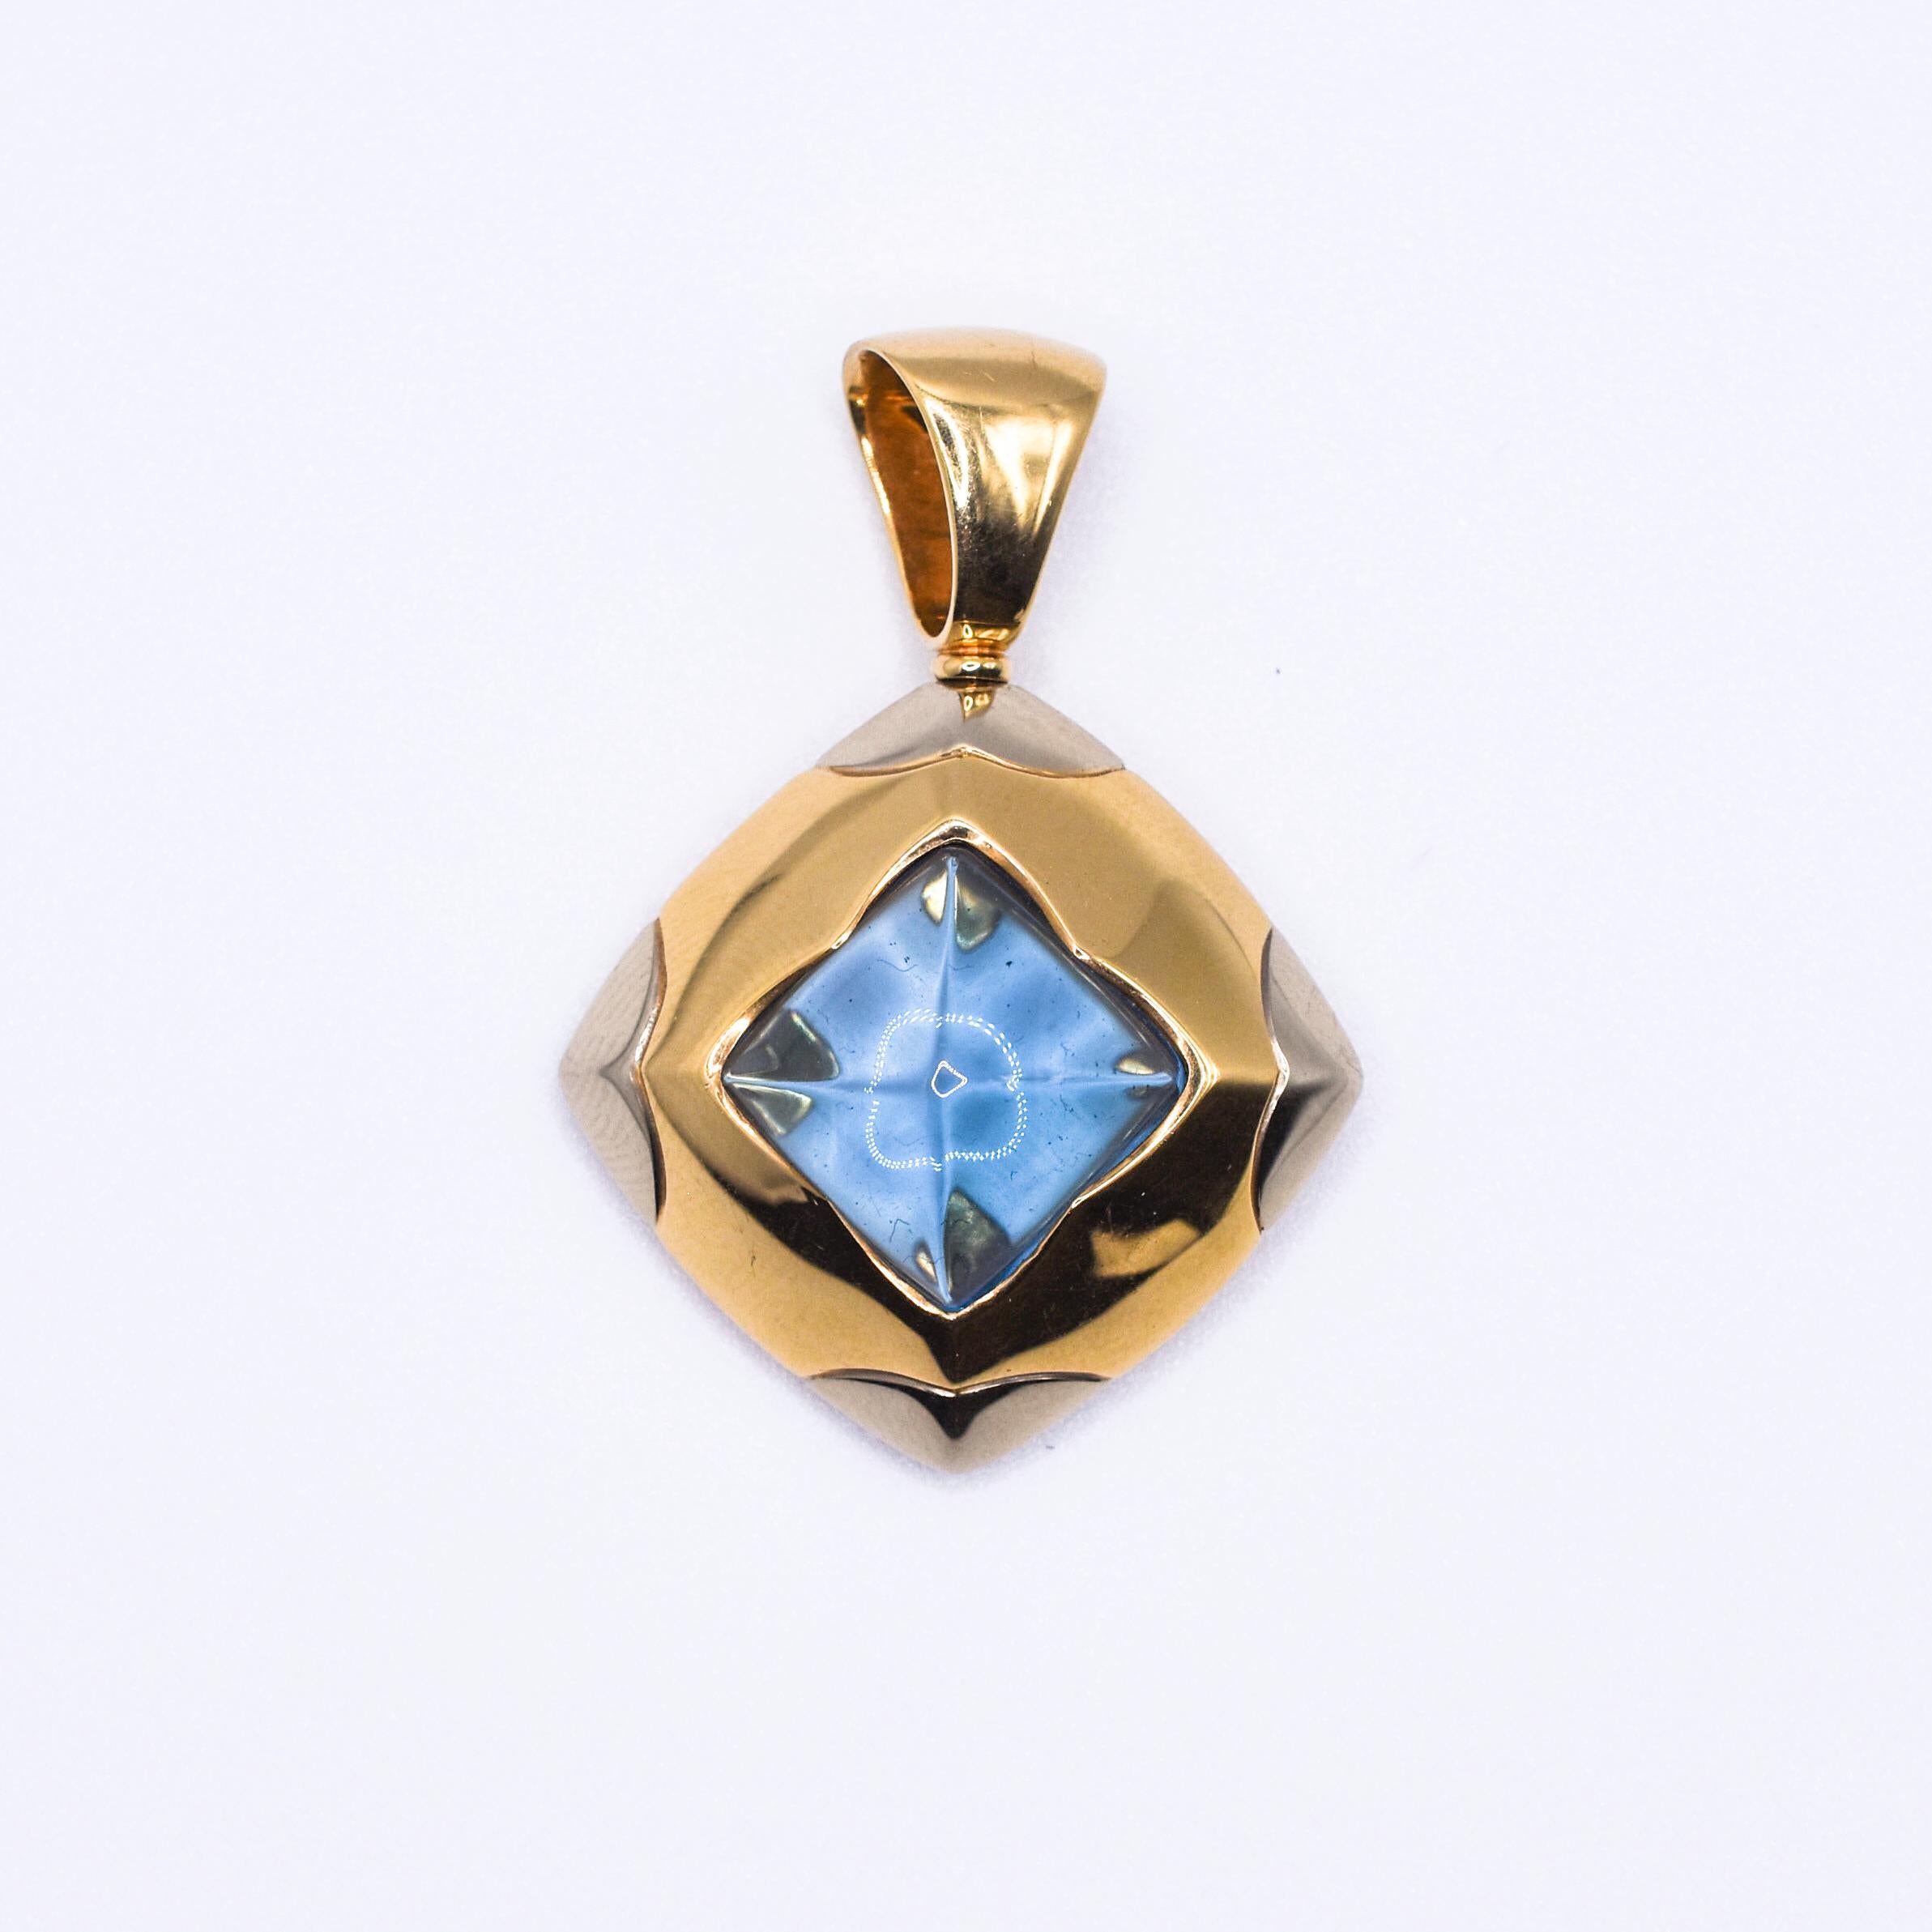 A Vintage Bulgari Topaz Pendant from the 'Pyramid' Collection, crafted in Two Tone 18k Gold. Made in Italy, circa 1980